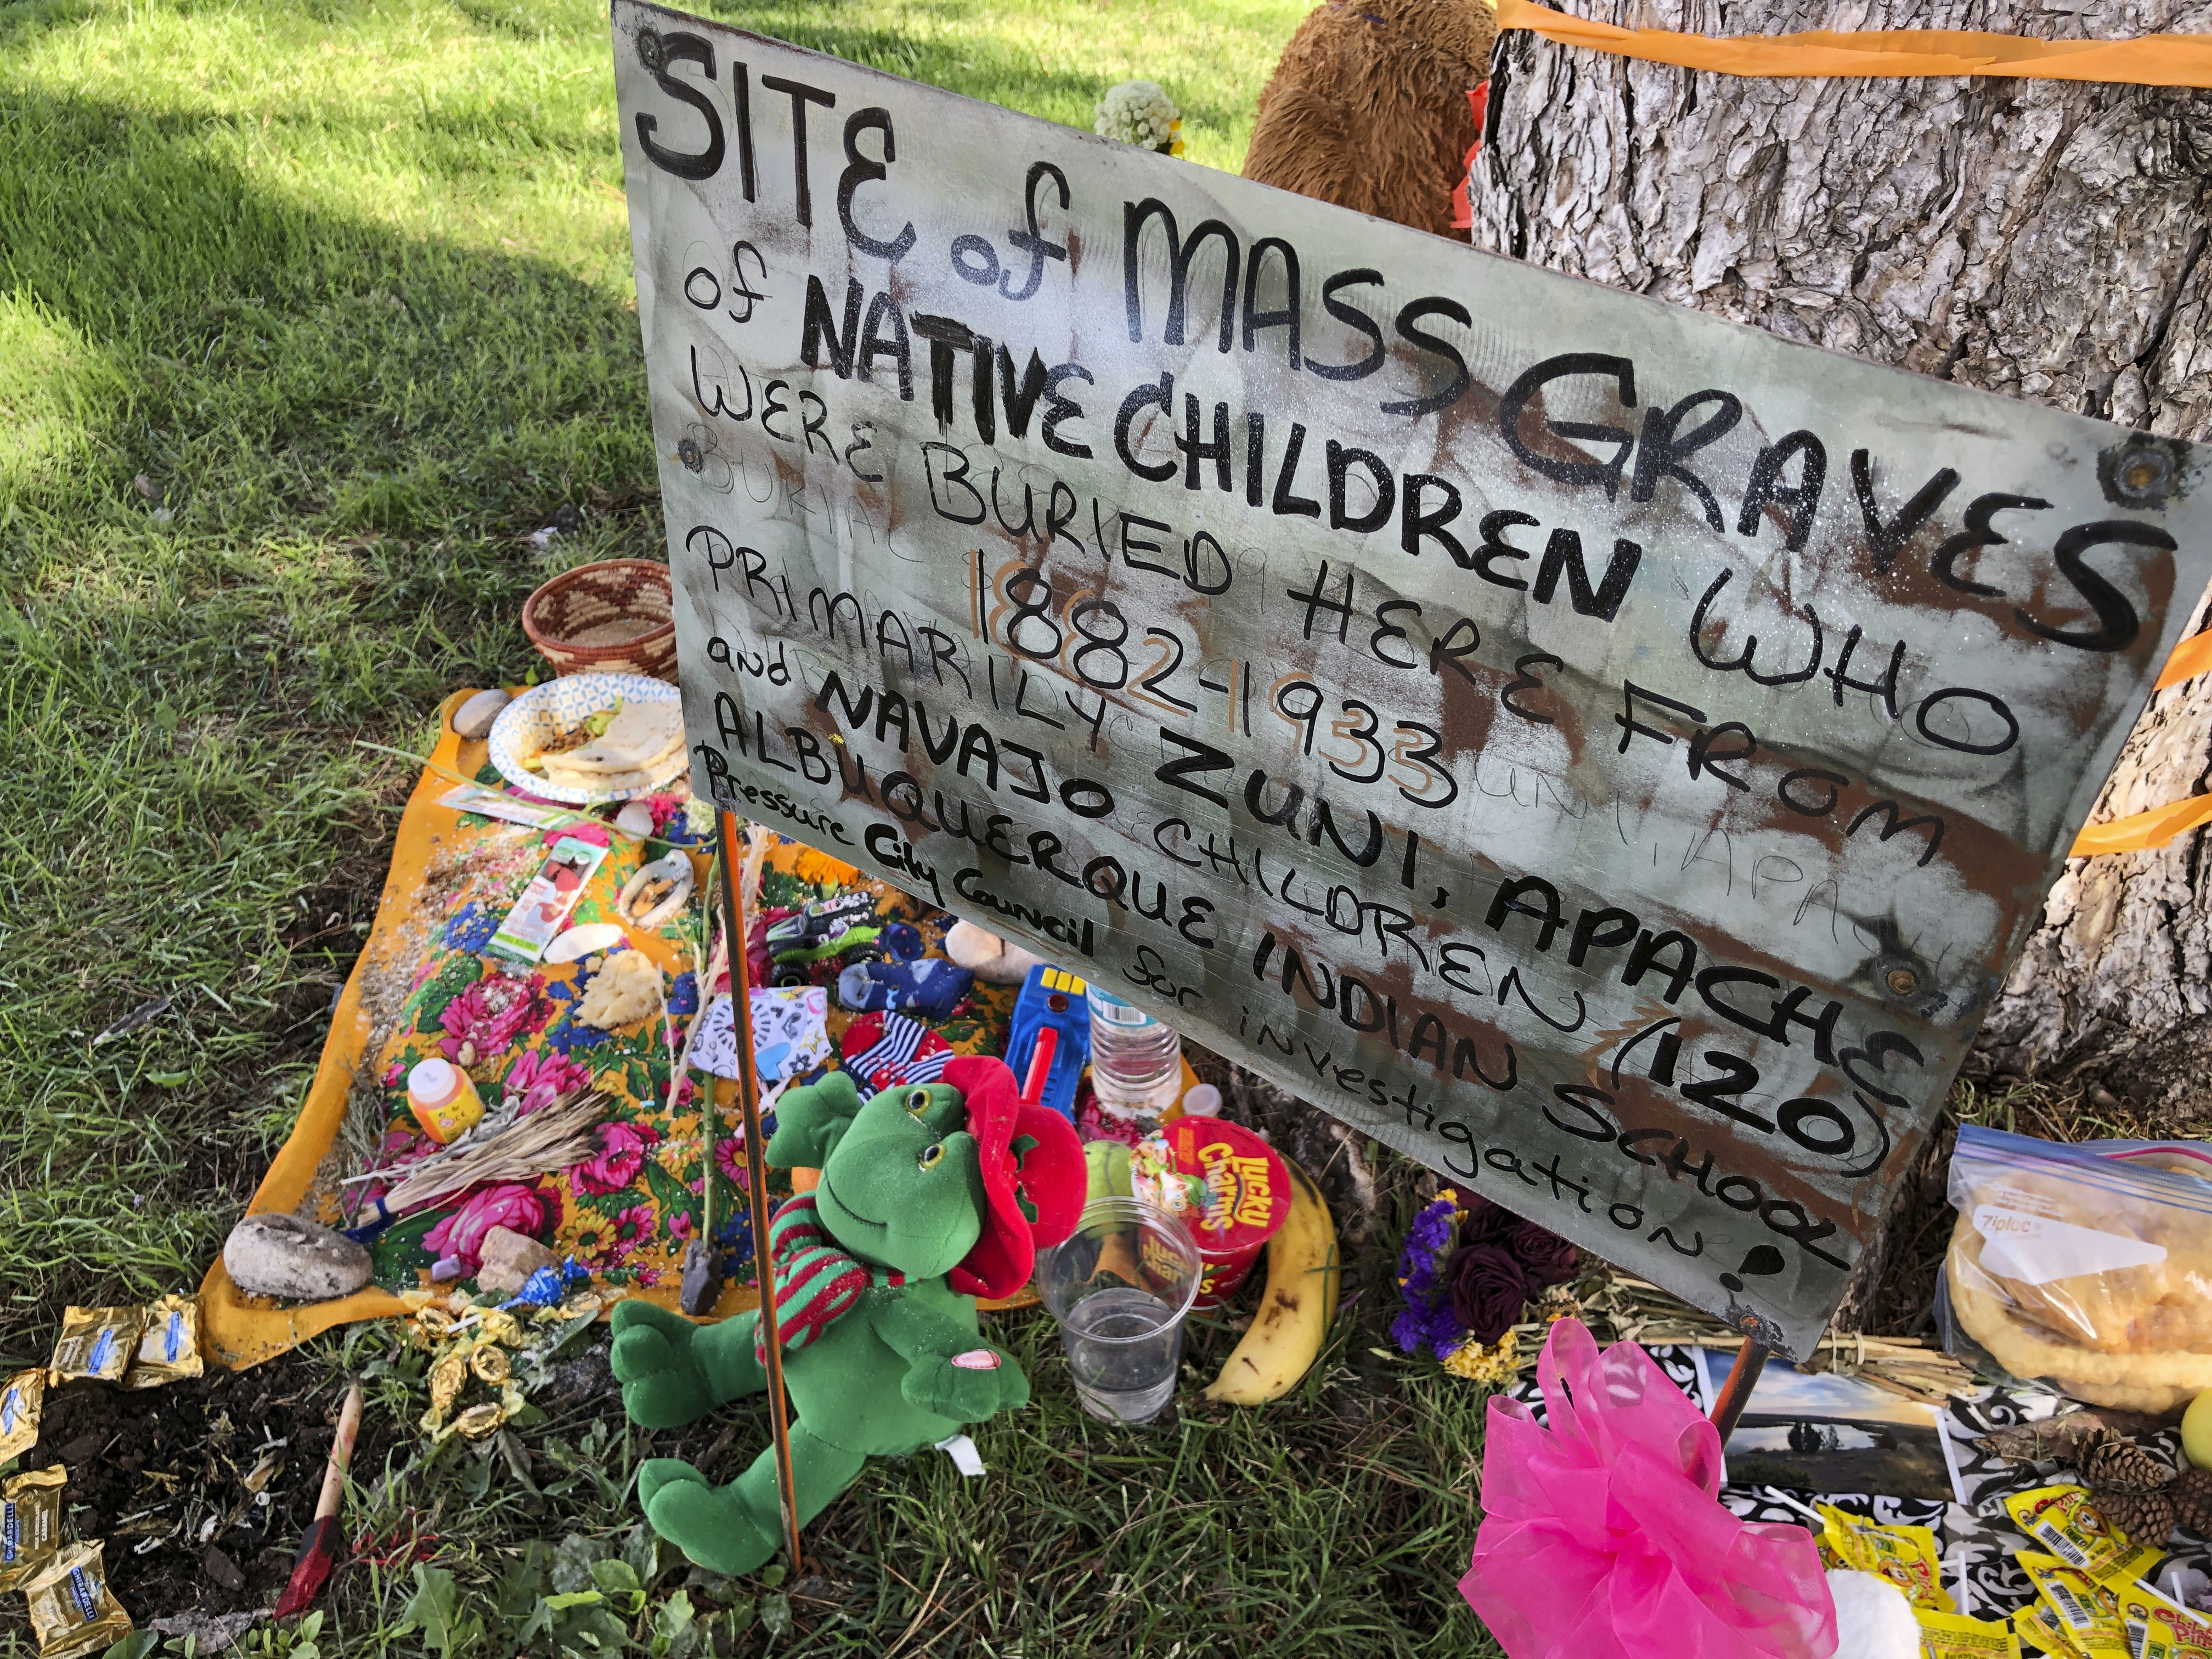 A makeshift memorial for the dozens of Indigenous children who died more than a century ago while attending a boarding school that was once located nearby is displayed under a tree in Albuquerque, N.M., on July 1, 2021 (AP Photo/Susan Montoya Bryan, File)